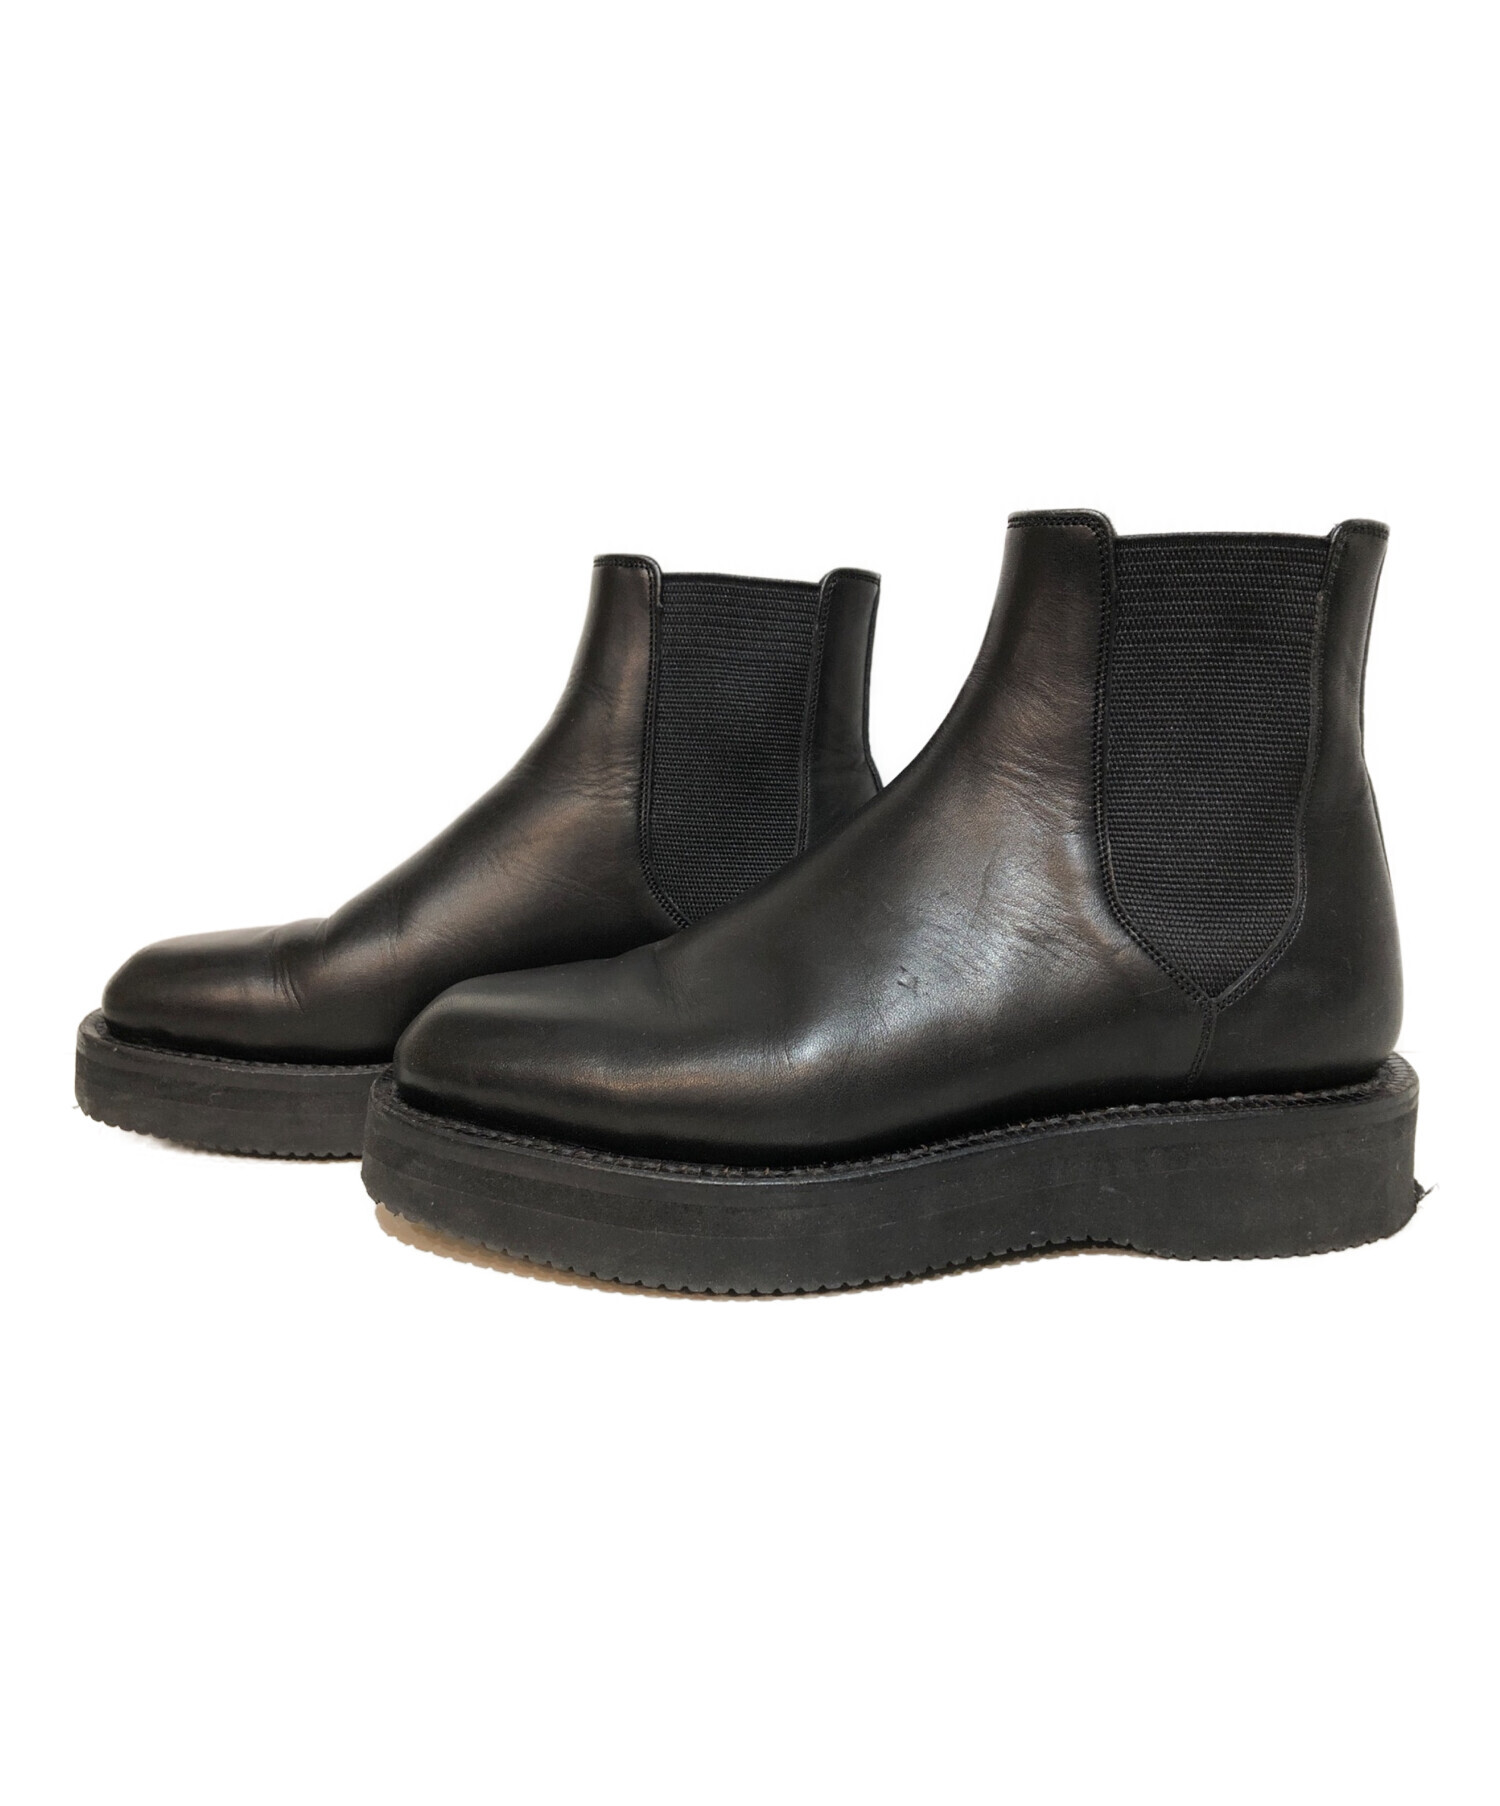 AURALEE × foot the coacher (オーラリー ×フットザコーチャー) 21AW LEATHER SQUARE BOOTS  MADE BY FOOT THE COACHER ブーツ ブラック サイズ:5